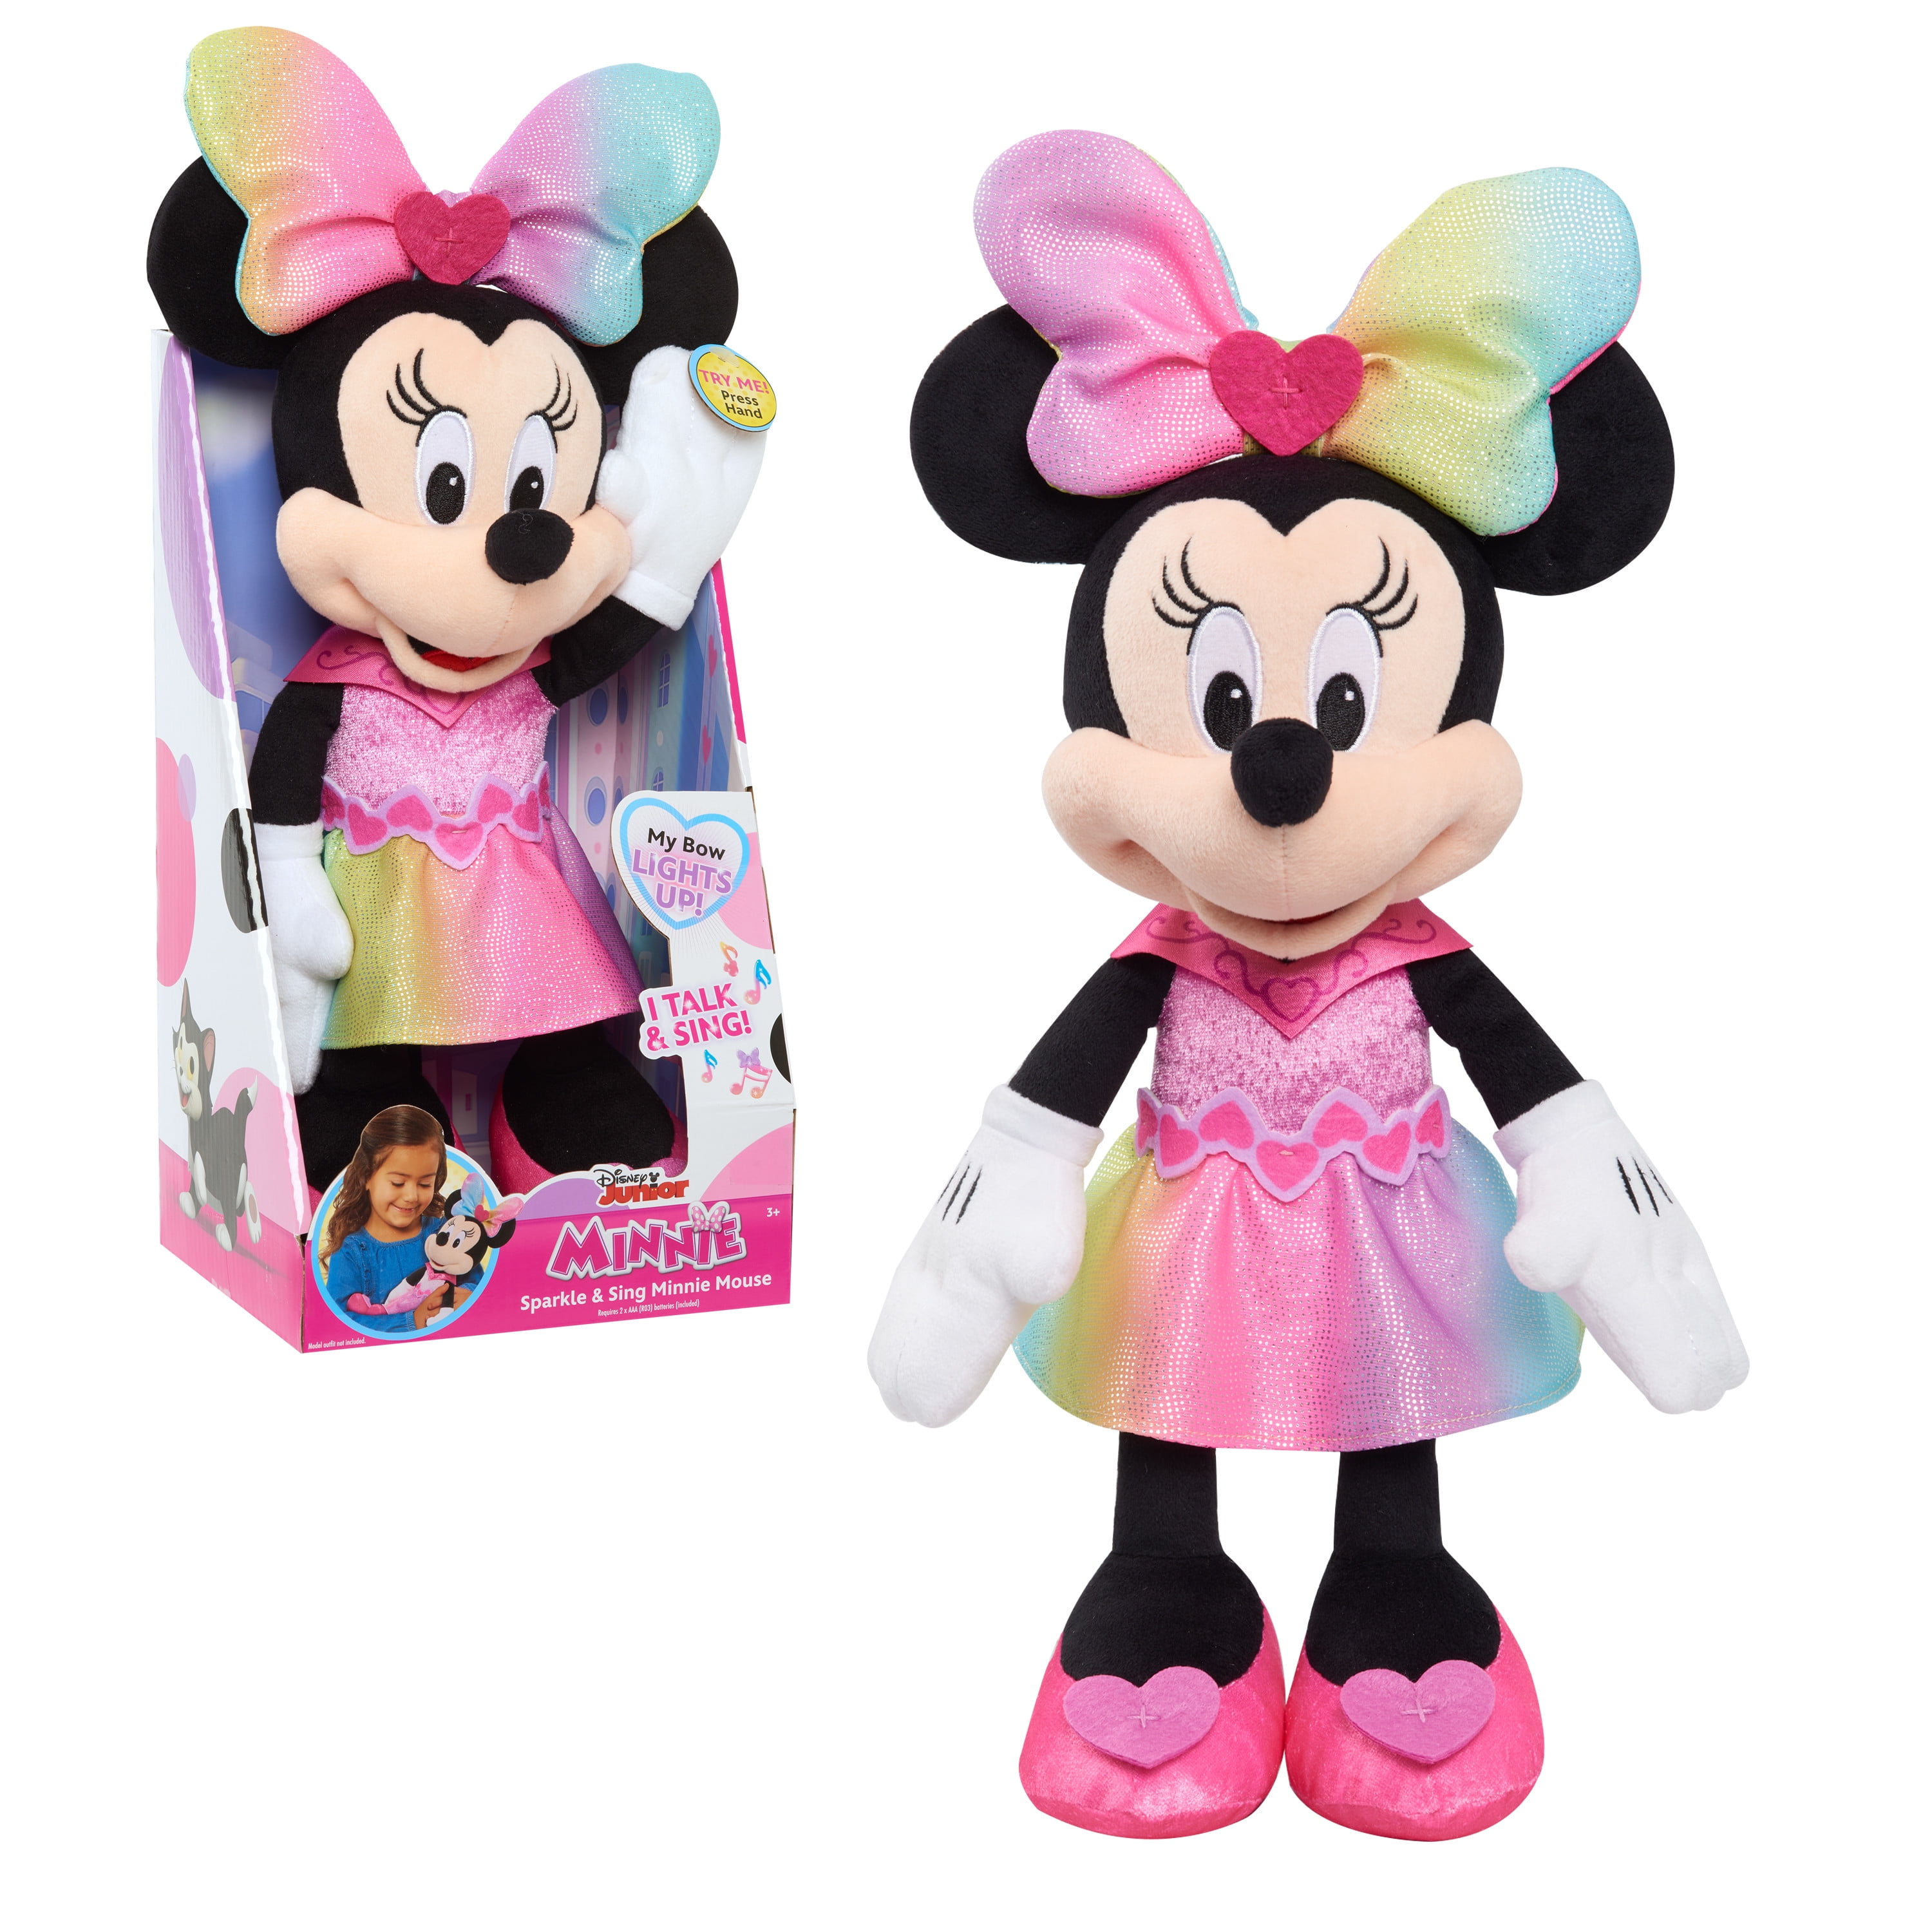 Minnie Mouse Disney 9 in Doll Toy Pink Plush 3 Years Girls TV Movies Kids Play for sale online 